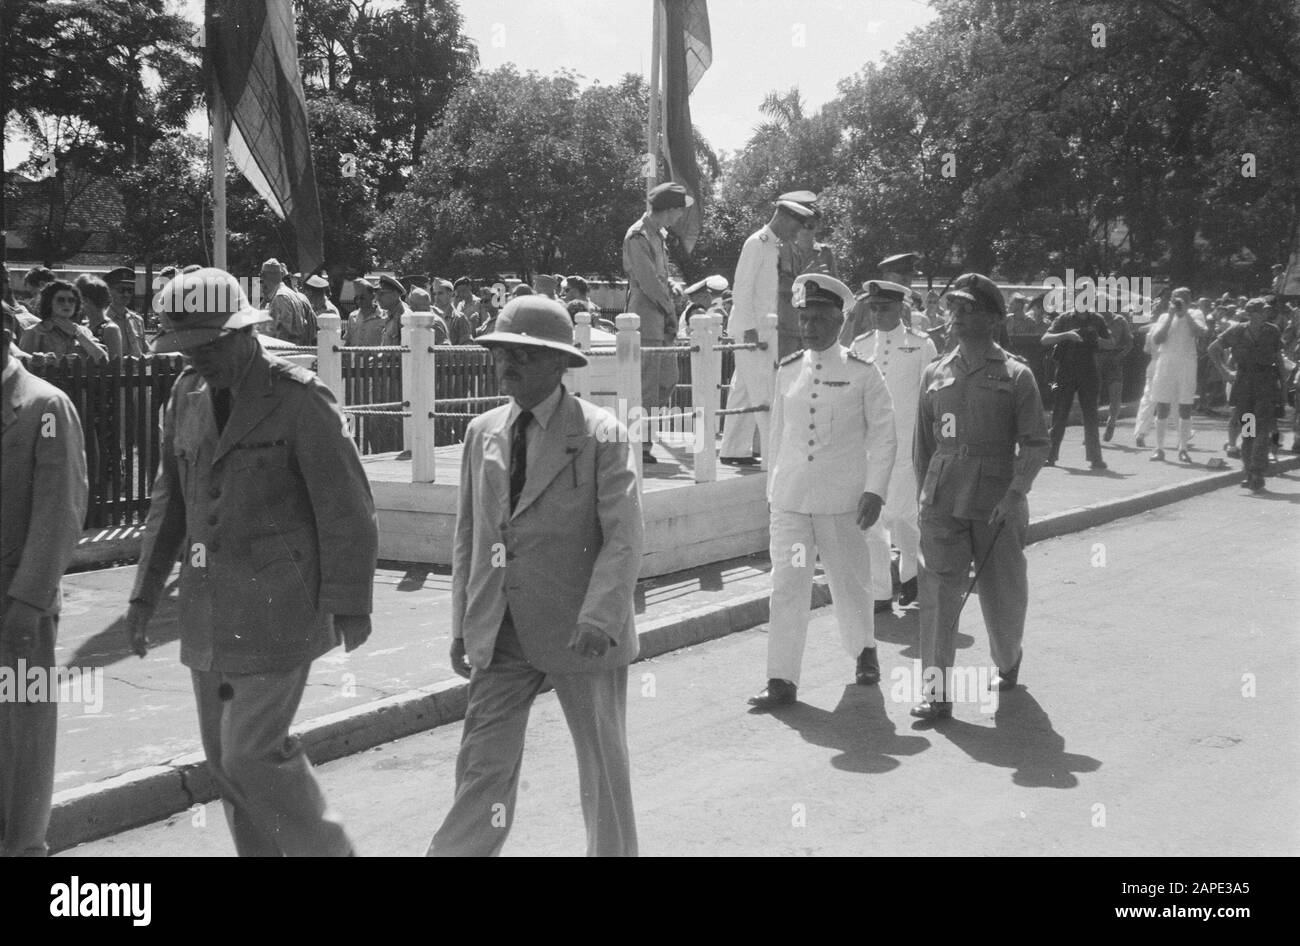 Parade t.g.v. birthday of Princess Juliana Description: Authorities leave the stage. Vlnr. Van Mook, Commissioner-General Van Poll, Vice Admiral Pinke, Army Commander General Spoor Date: 30 April 1947 Location: Batavia, Indonesia, Jakarta, Dutch East Indies Stock Photo